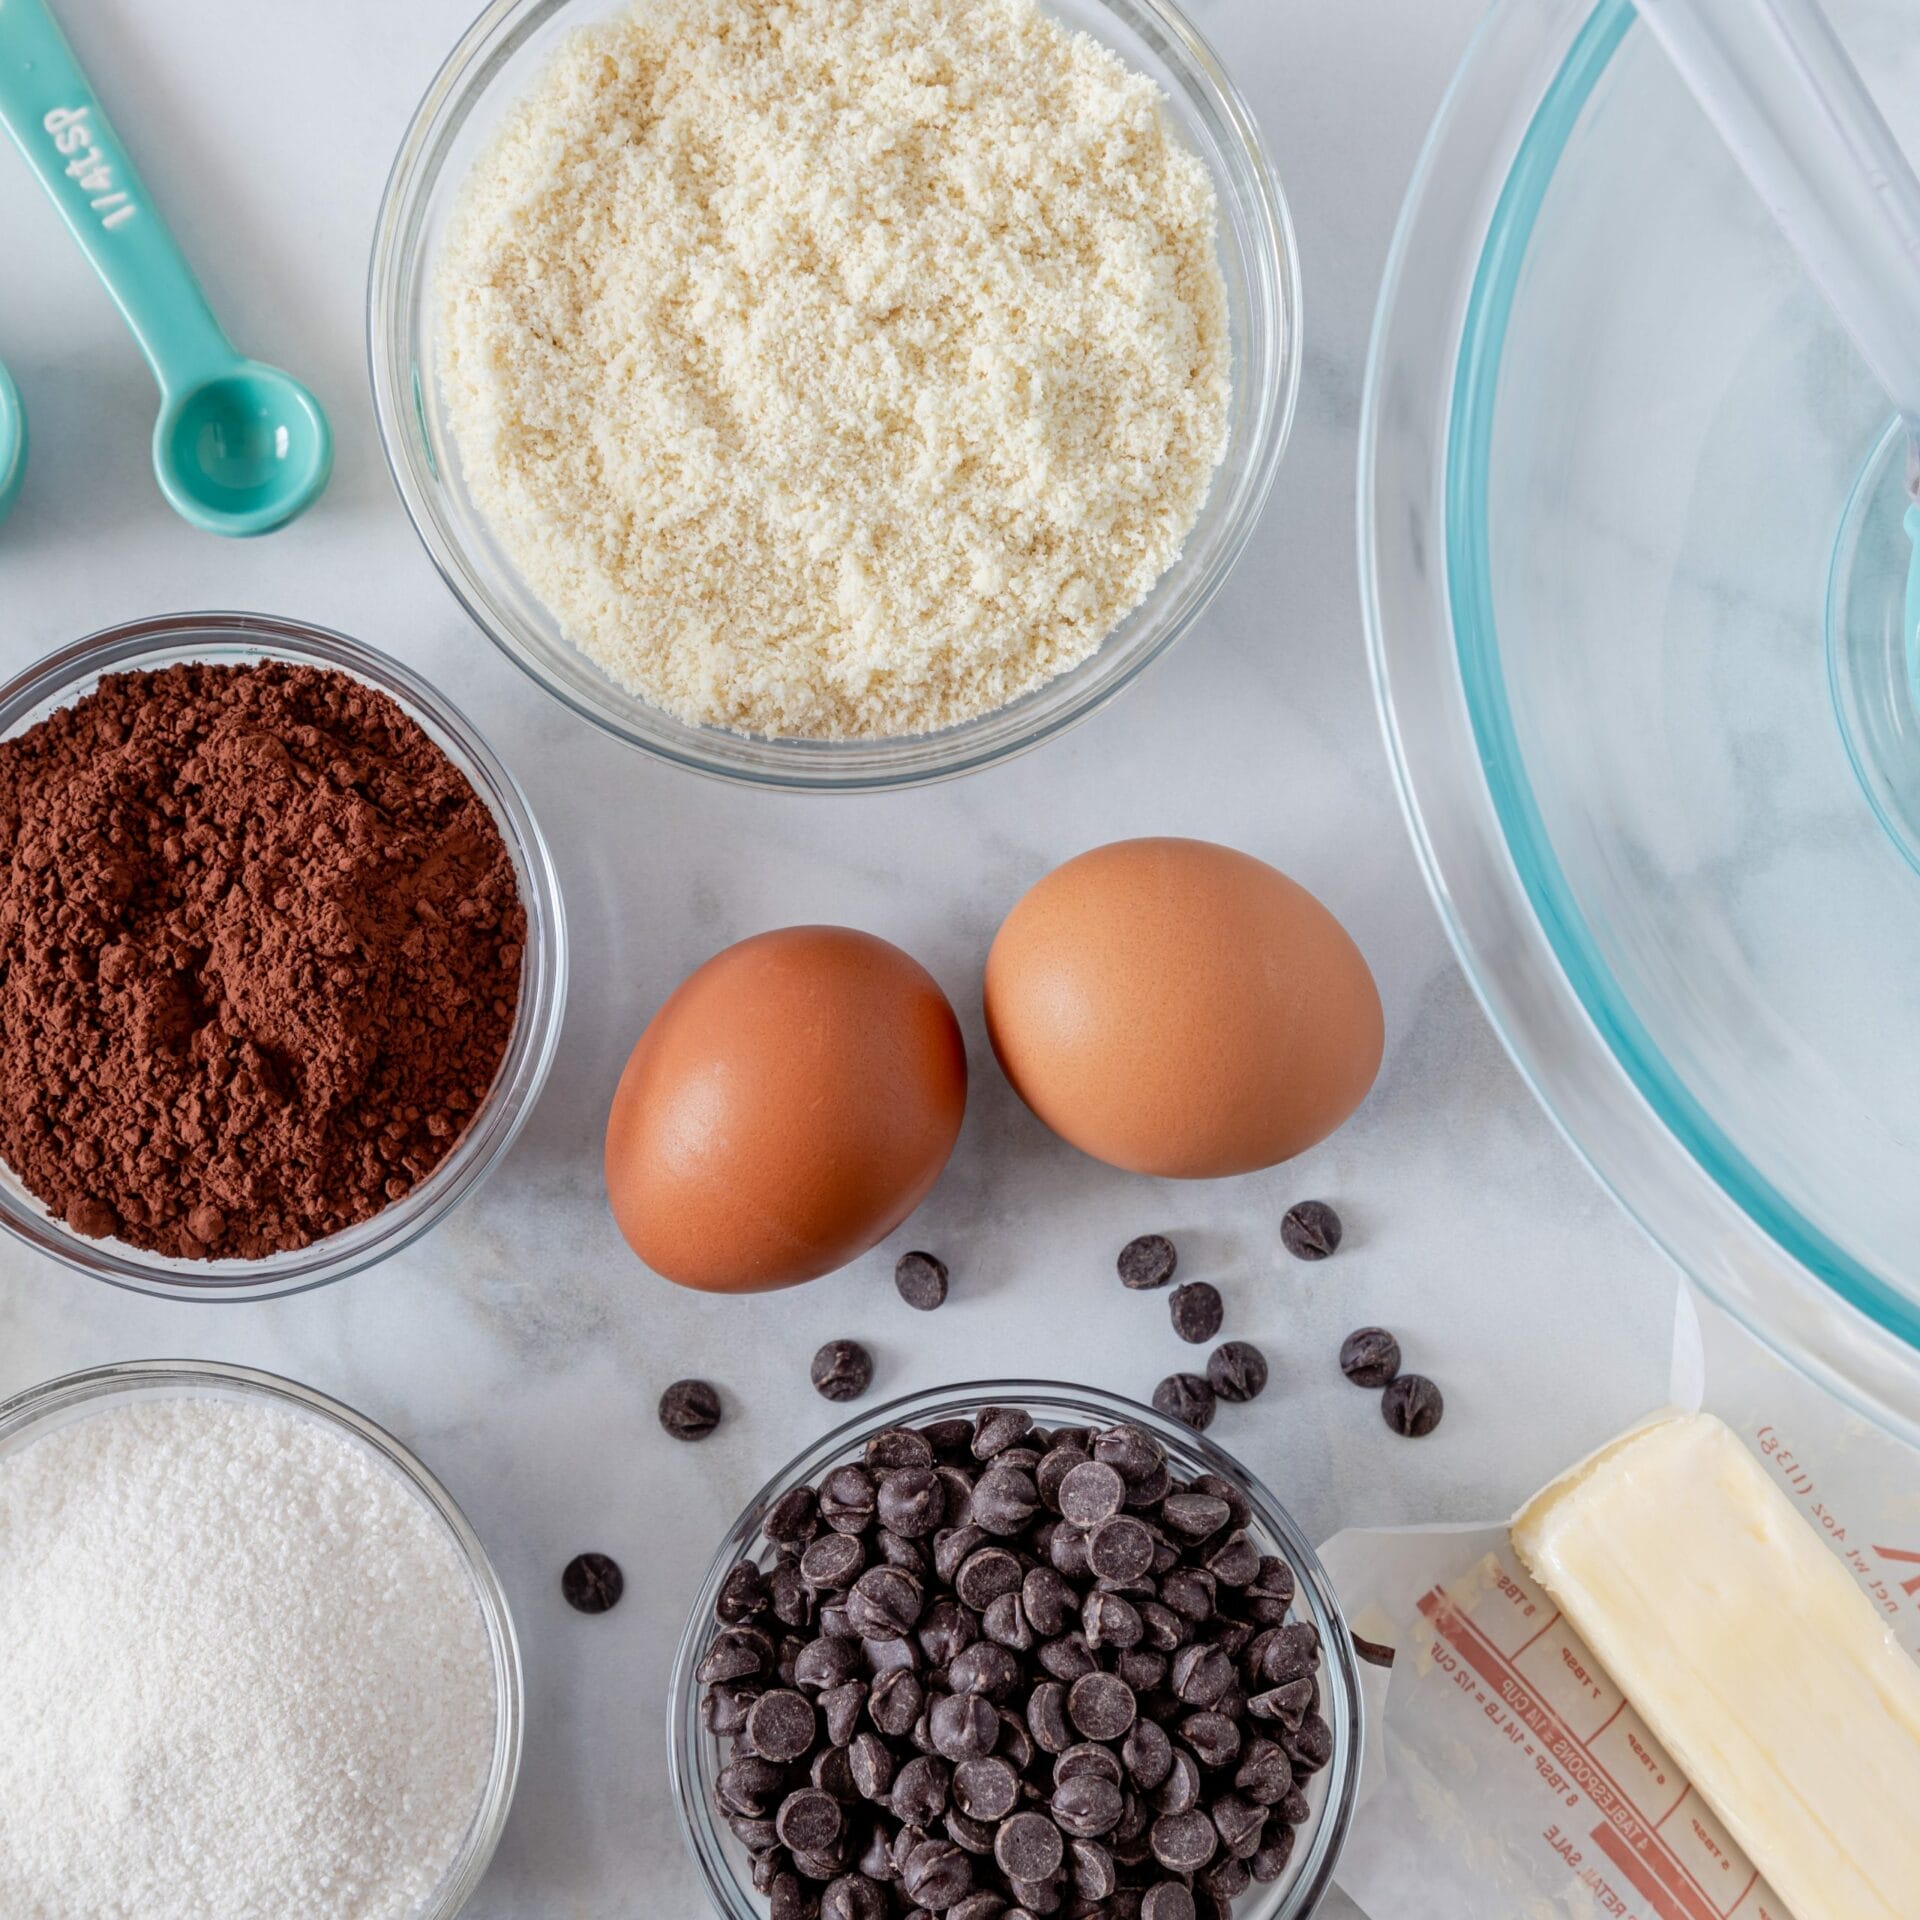 Ingredients and tools to make keto chocolate chip brownies shot from above